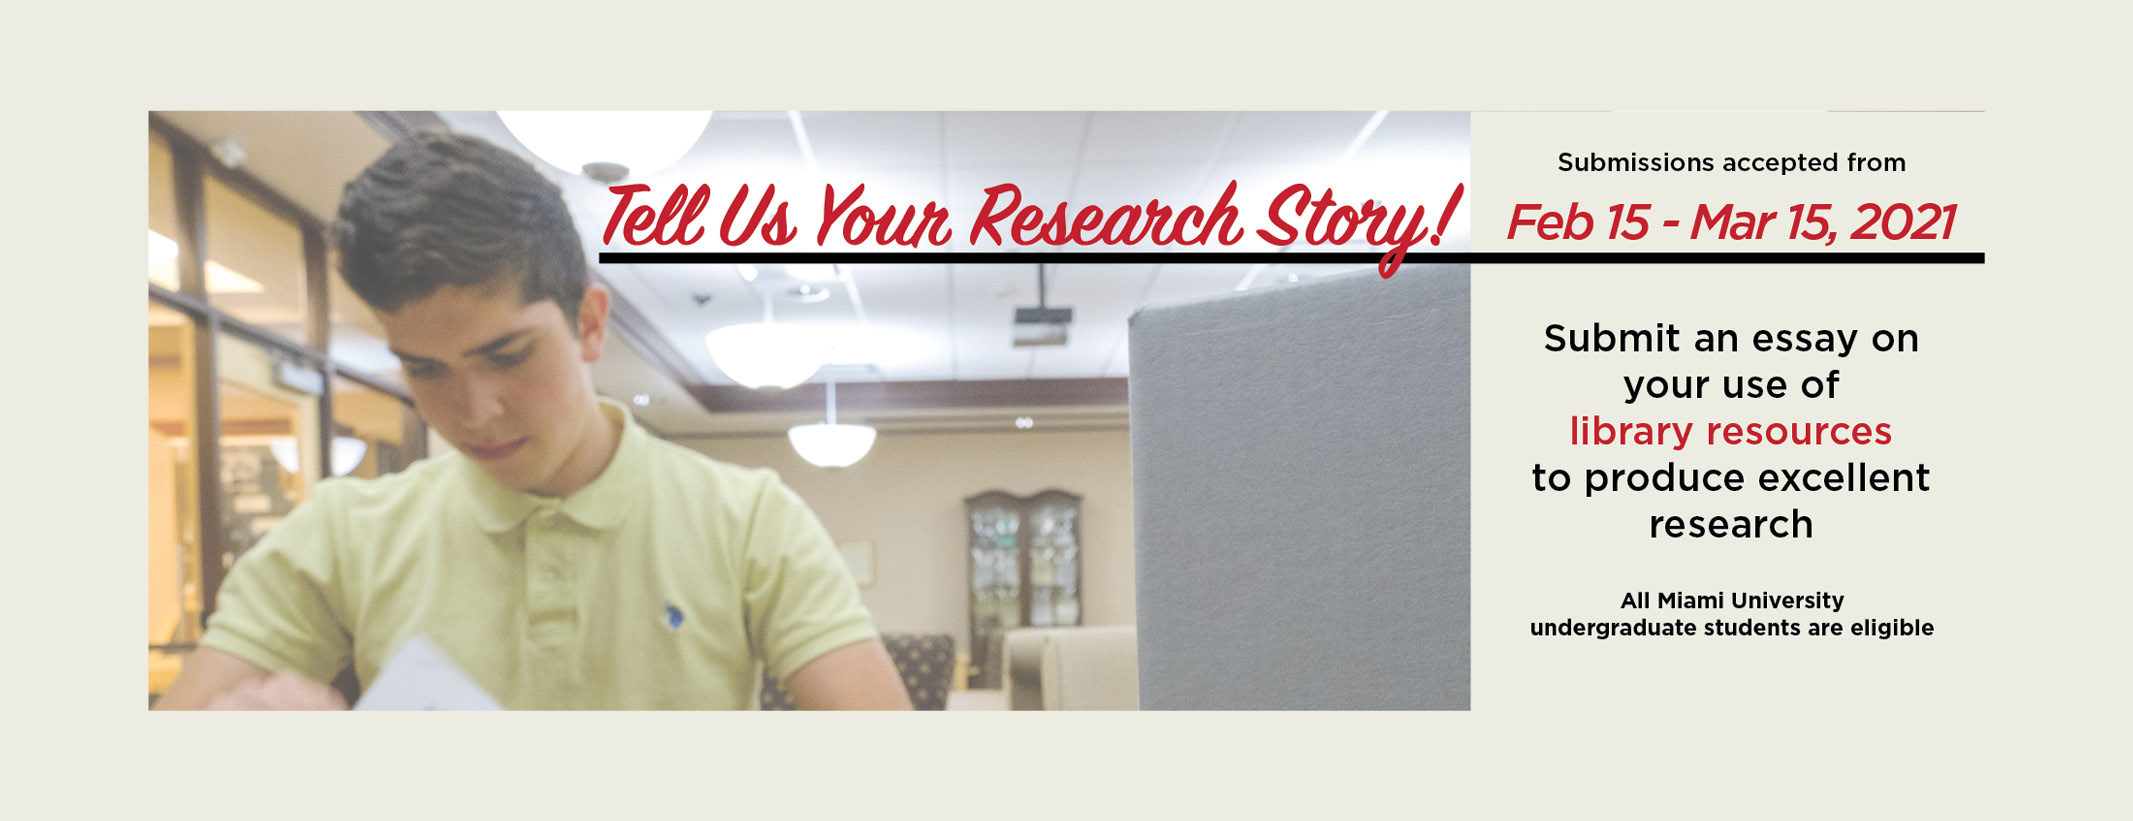 Tell Us Your Research Story!